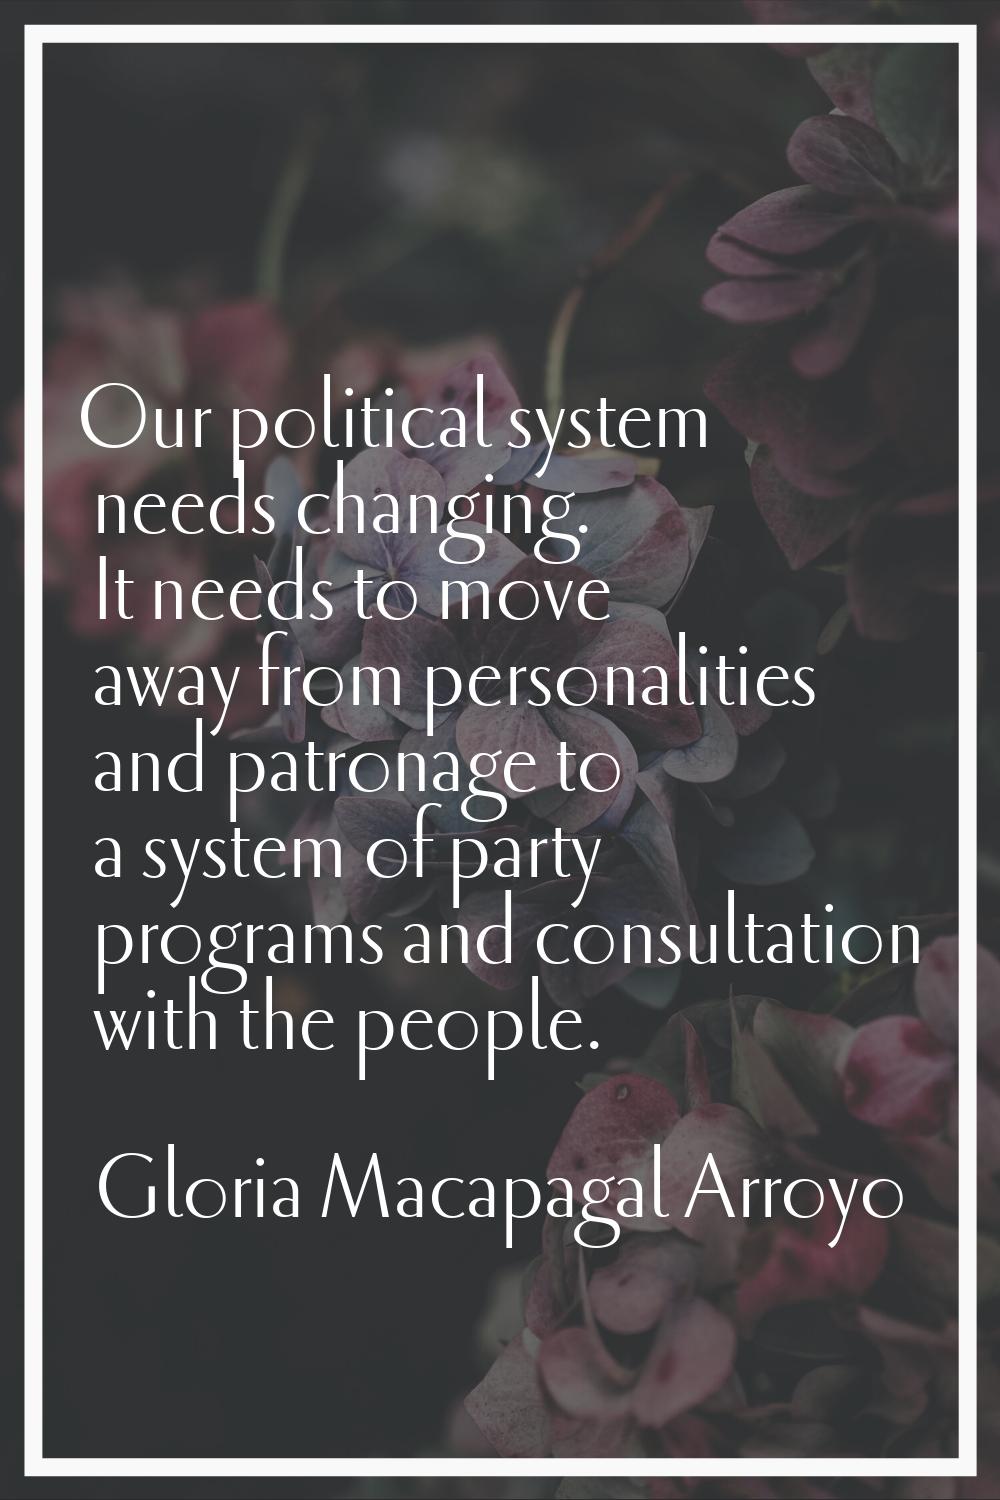 Our political system needs changing. It needs to move away from personalities and patronage to a sy